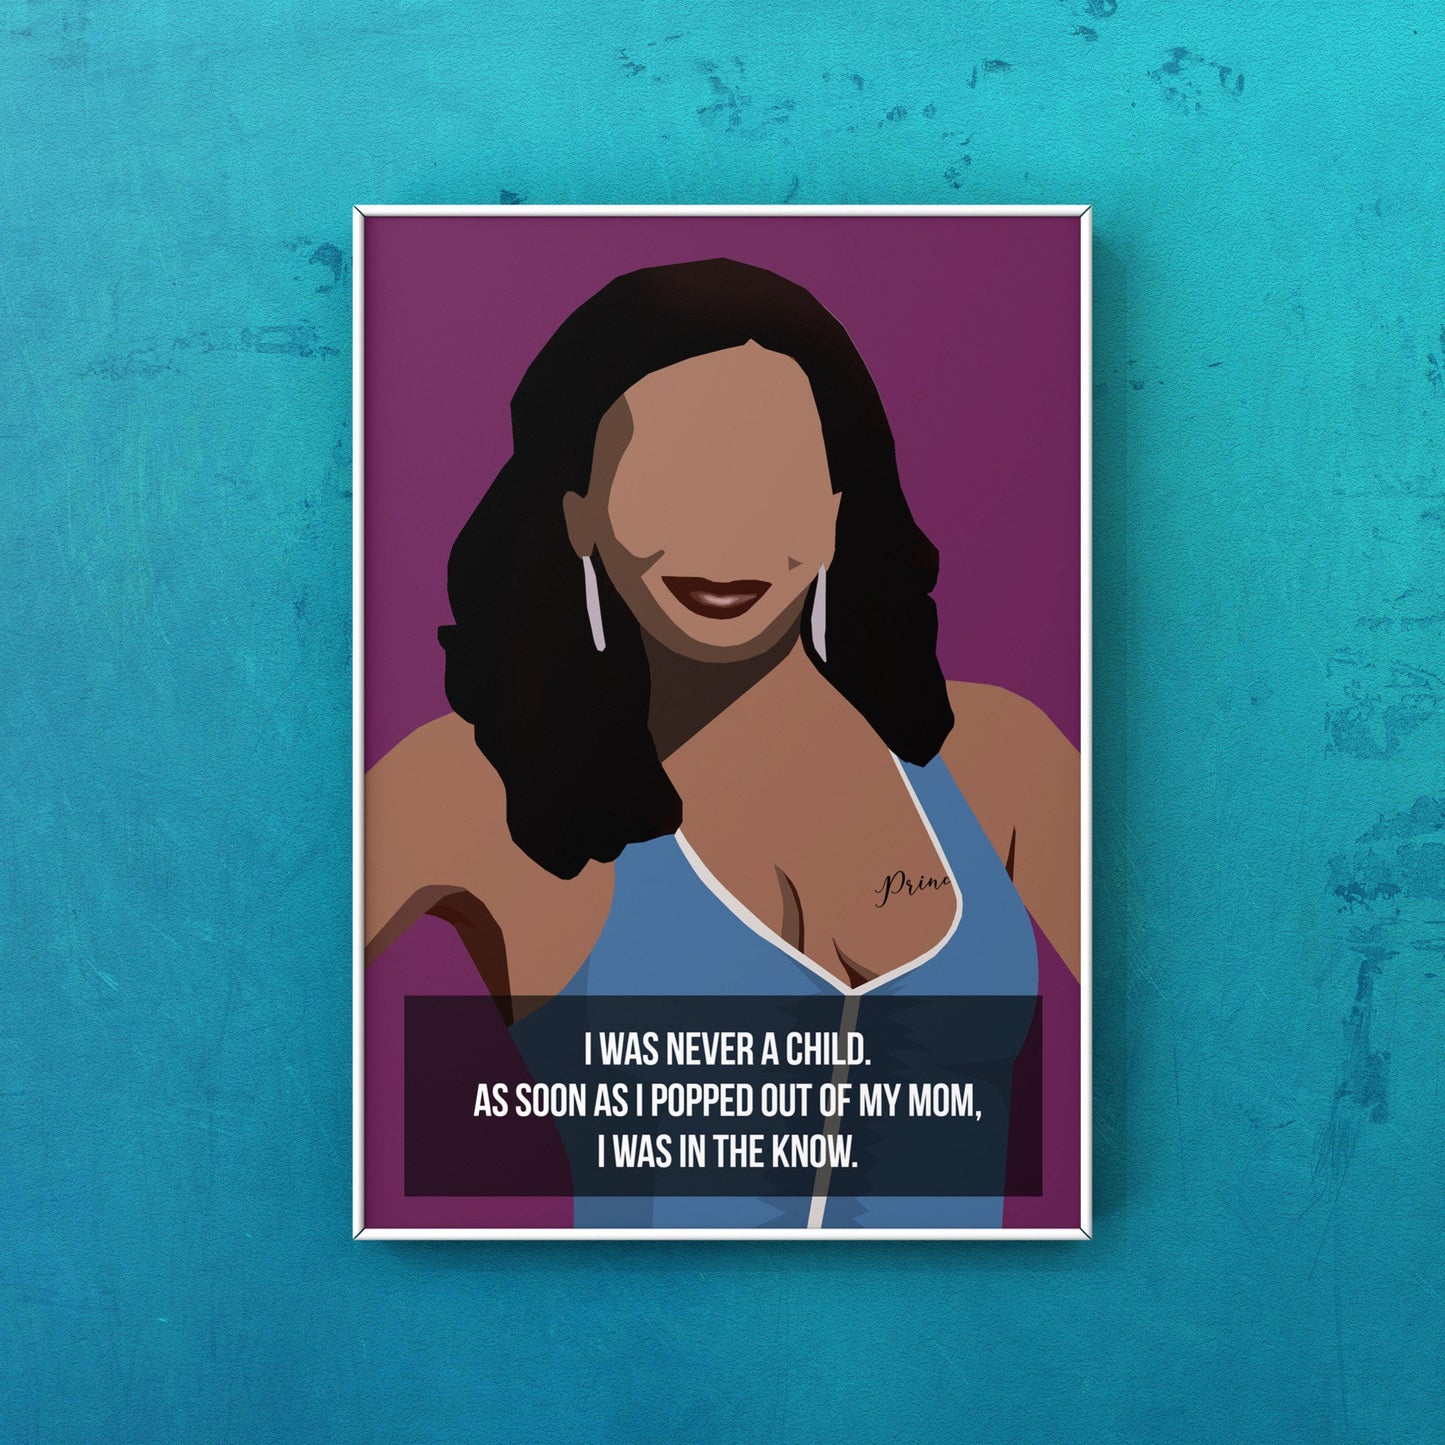 "I was never a child. As soon as I popped out of my mom, I was in the know." - New York, Tiffany Pollard Fan Art from VH1's I Love New York and Flavor of Love